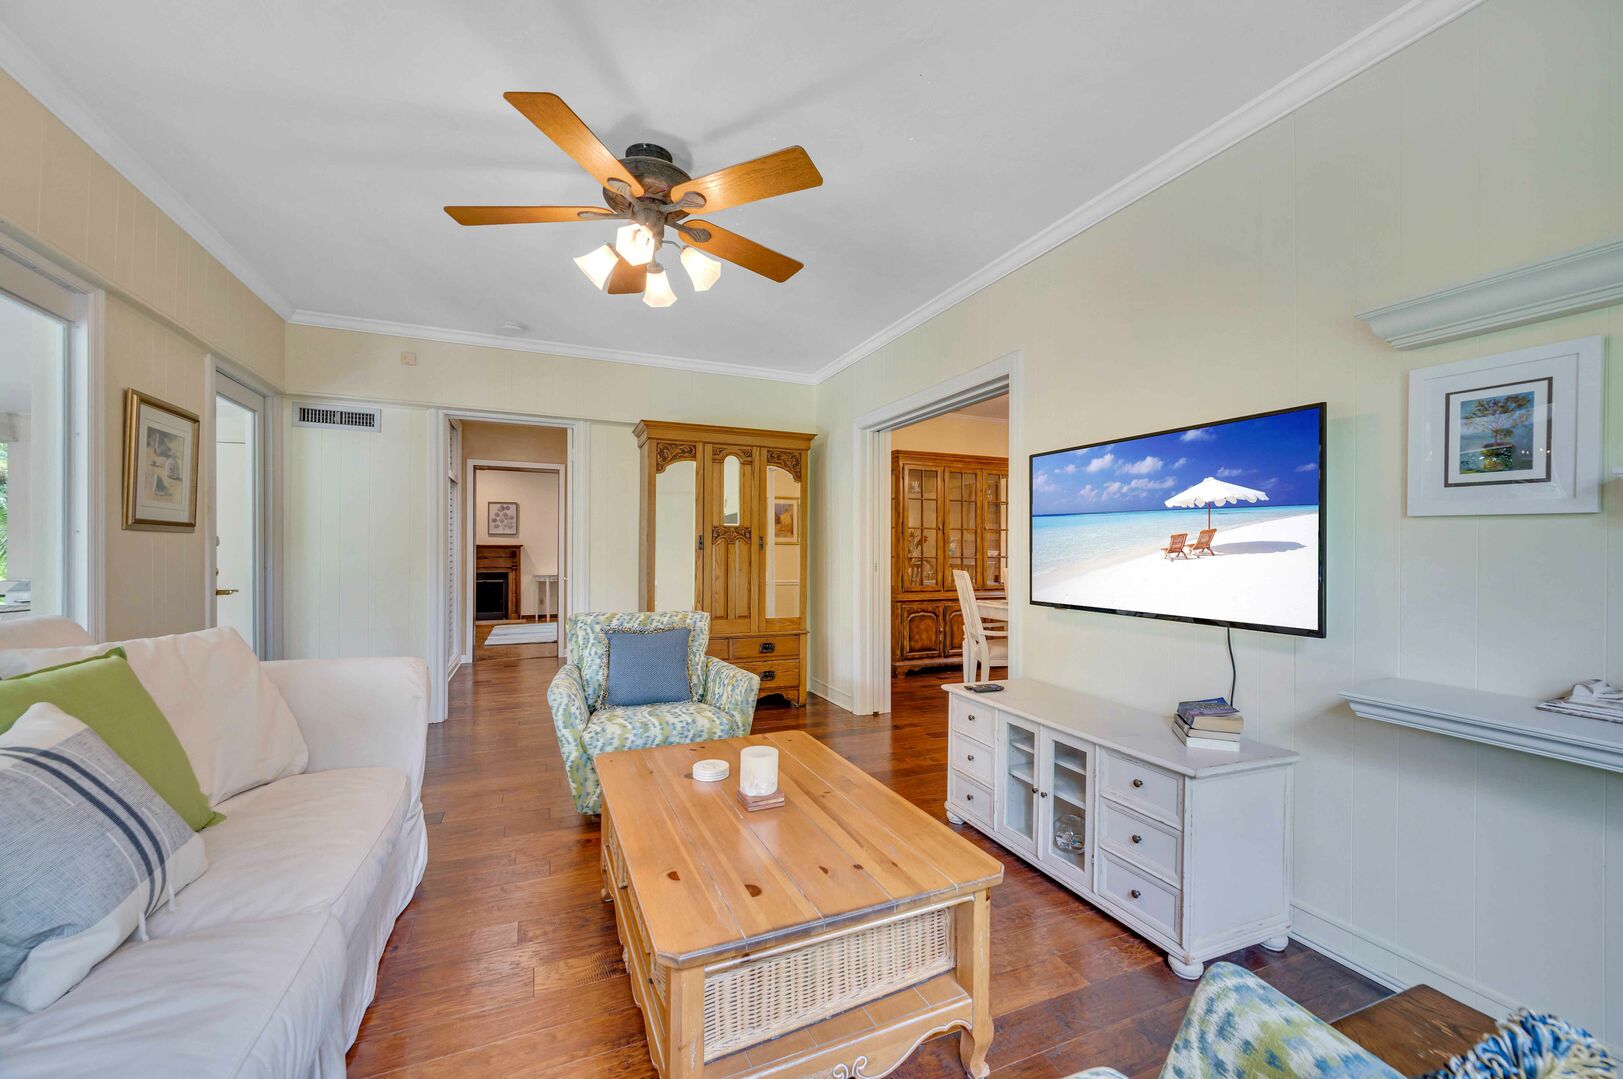 The family room has a view of the pool and is equipped with a smart TV for your enjoyment.